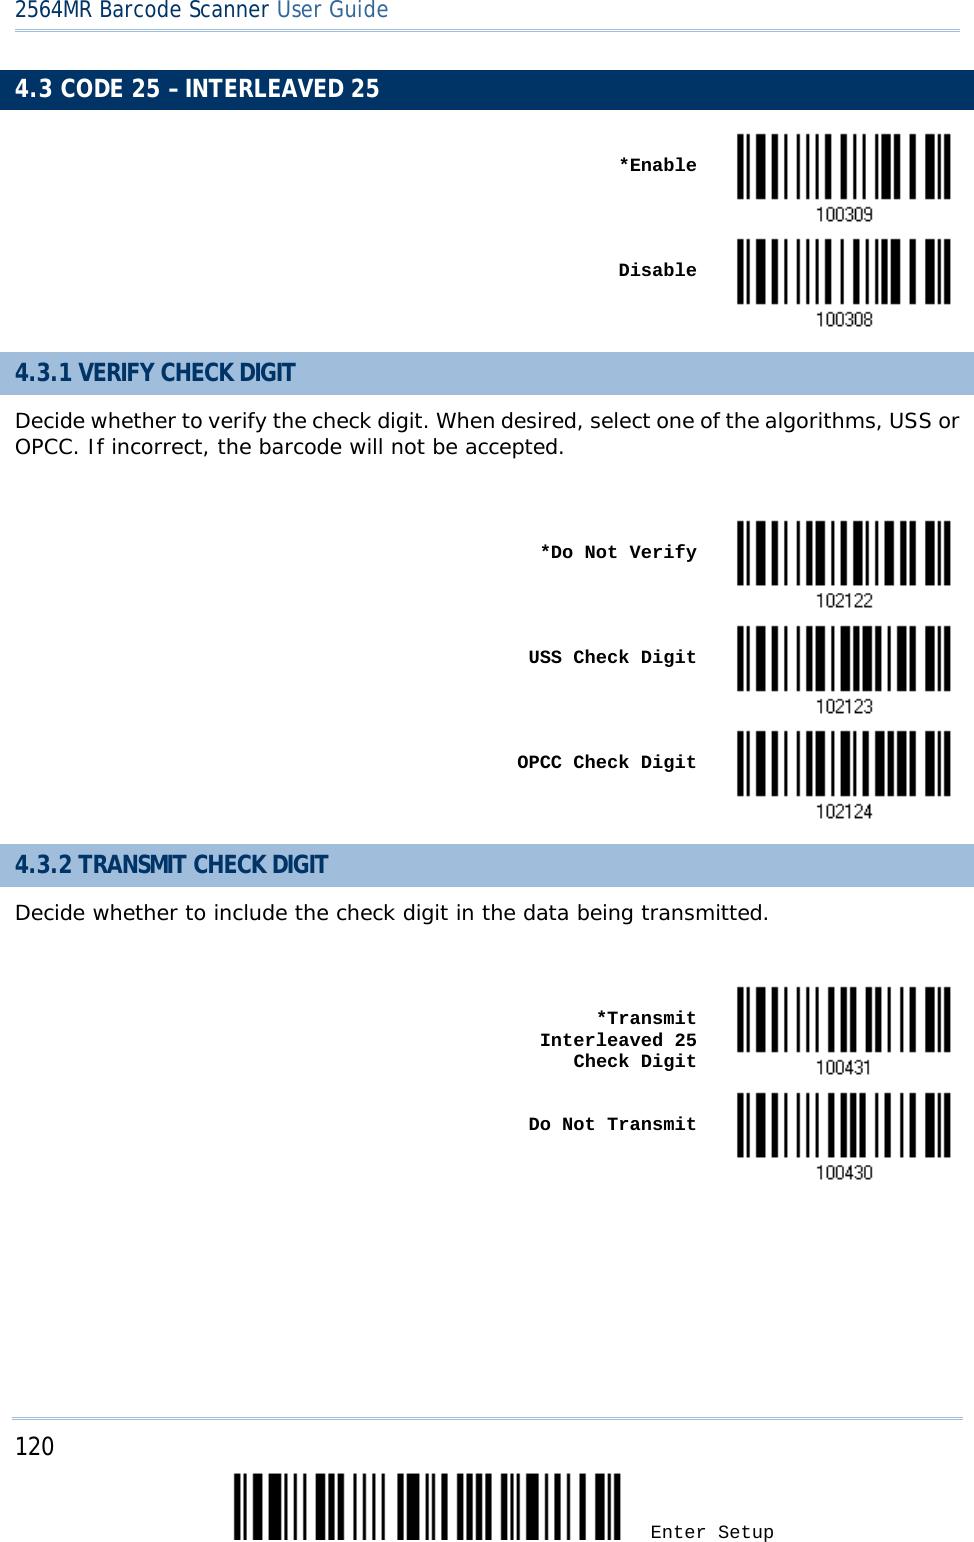 2564MR Barcode Scanner User Guide  4.3 CODE 25 – INTERLEAVED 25    *Enable     Disable  4.3.1 VERIFY CHECK DIGIT Decide whether to verify the check digit. When desired, select one of the algorithms, USS or OPCC. If incorrect, the barcode will not be accepted.     *Do Not Verify     USS Check Digit     OPCC Check Digit  4.3.2 TRANSMIT CHECK DIGIT Decide whether to include the check digit in the data being transmitted.     *Transmit Interleaved 25   Check Digit     Do Not Transmit       120 Enter Setup 